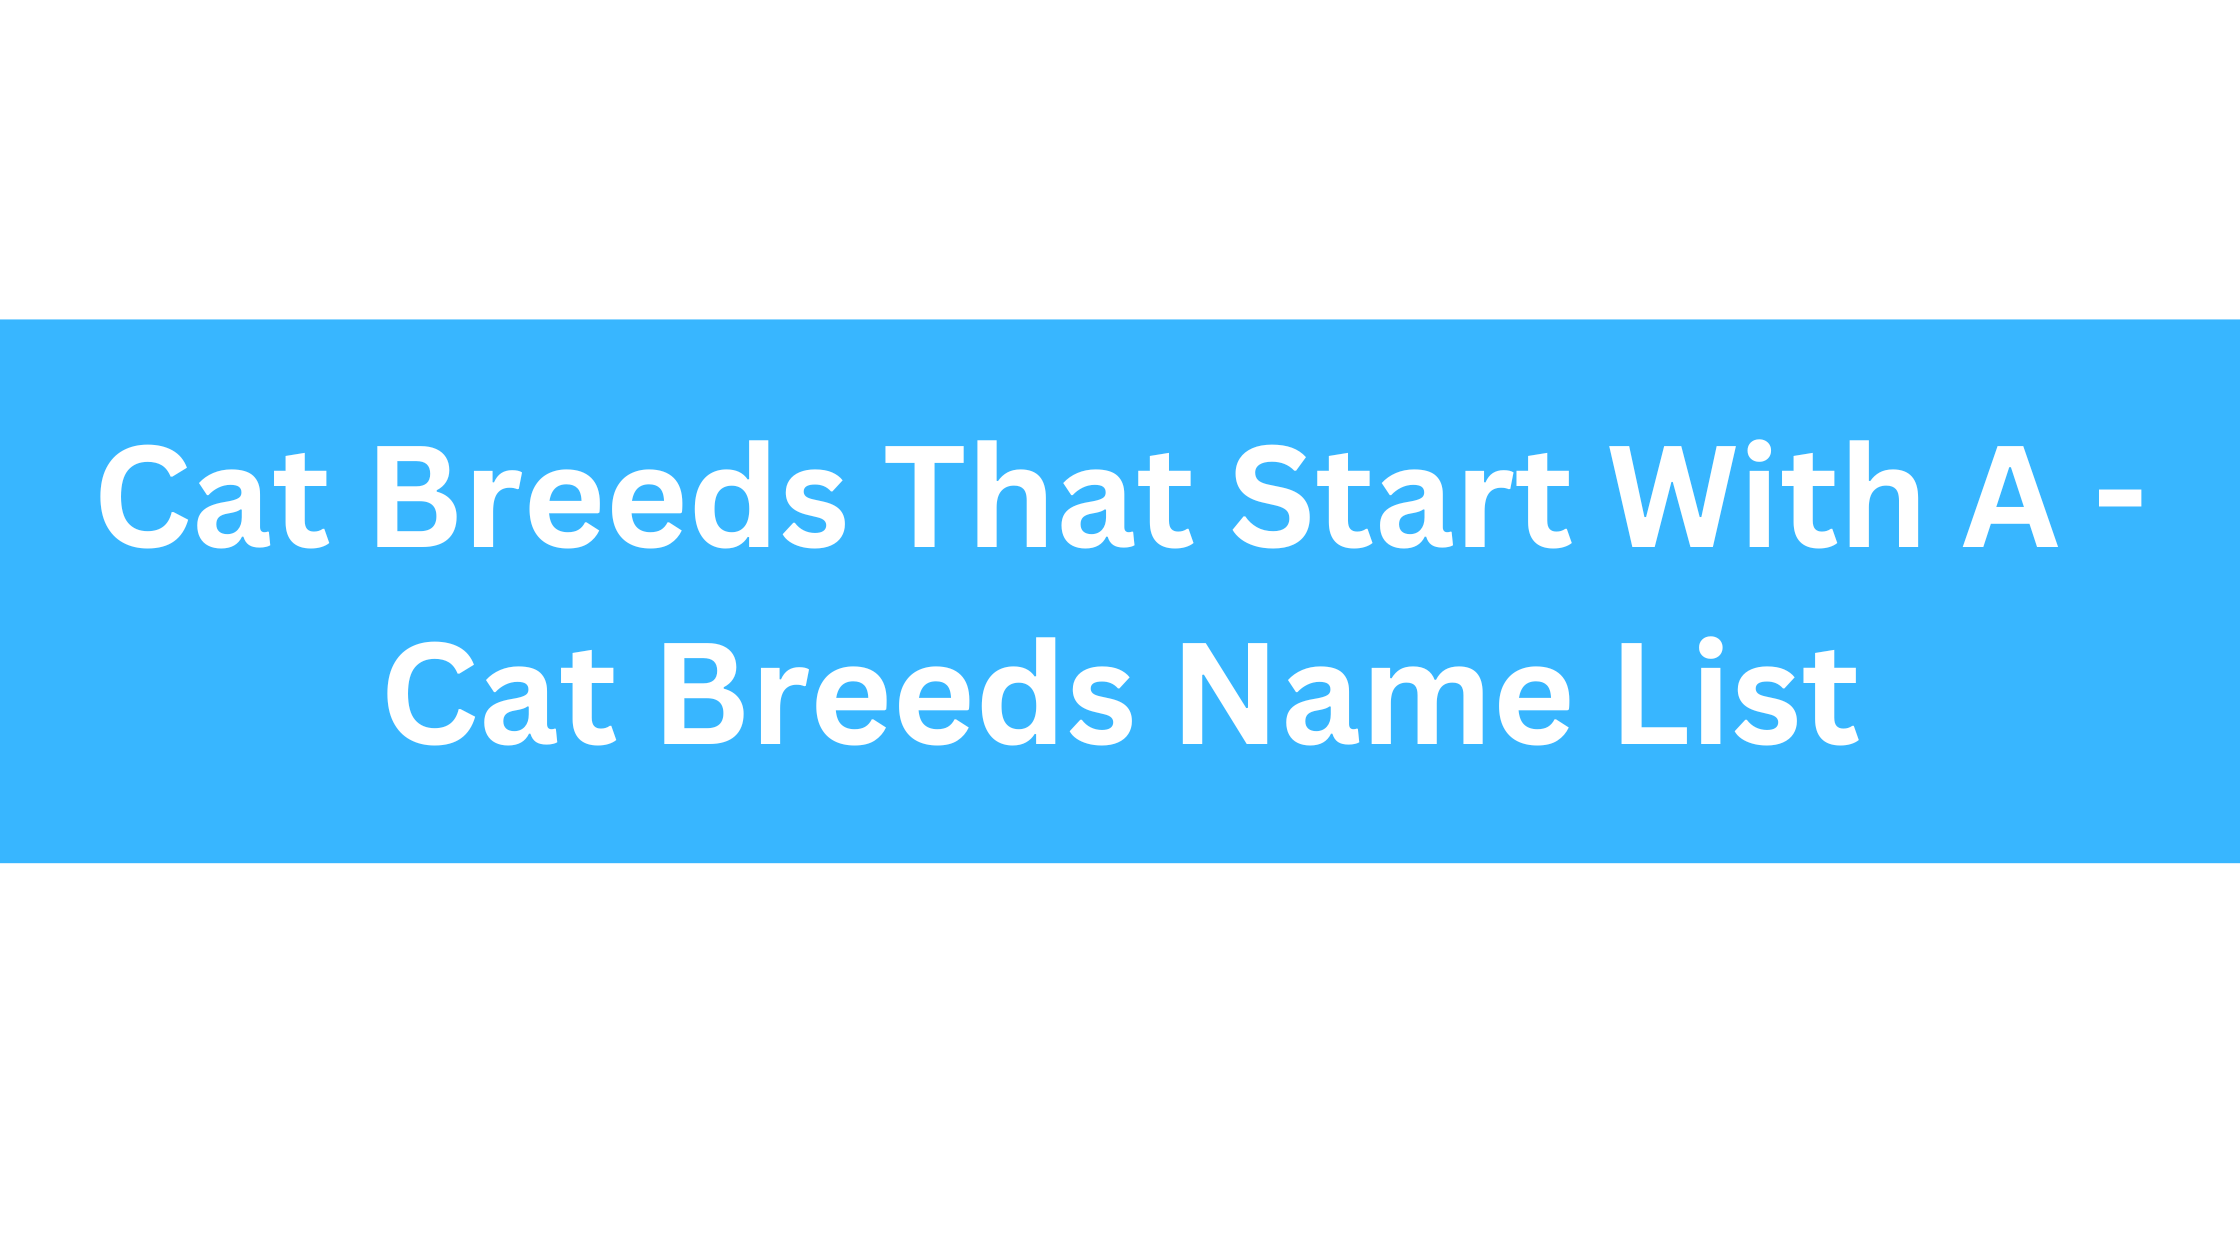 Cat Breeds That Start With A